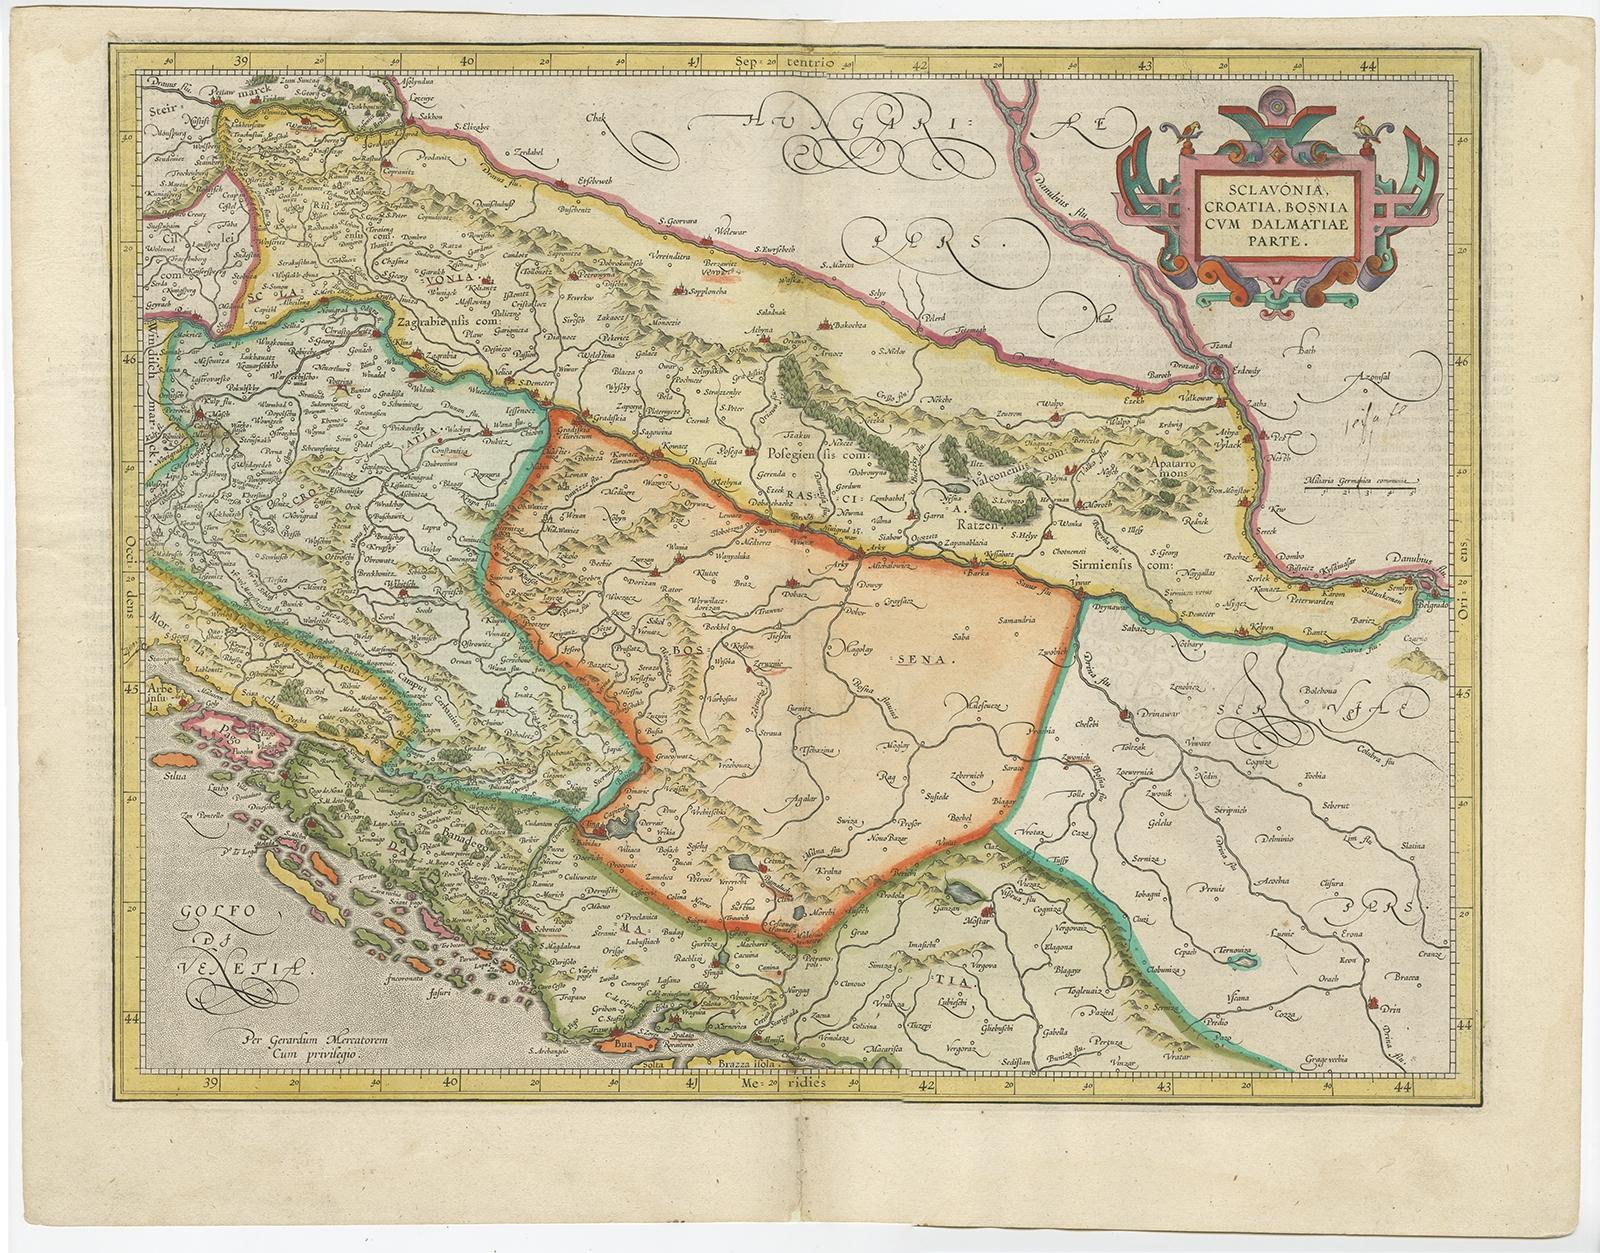 Antique map titled 'Sclavonia, Croatia, Bosnia cum Dalmatiae Parte'. Old map of the Eastern Balkans with the geographical & political divisions of Dalmatia, Croatia, Slavonia, Bosnia, Serbia, etc. The map details the course of the Danube, Sauus, and